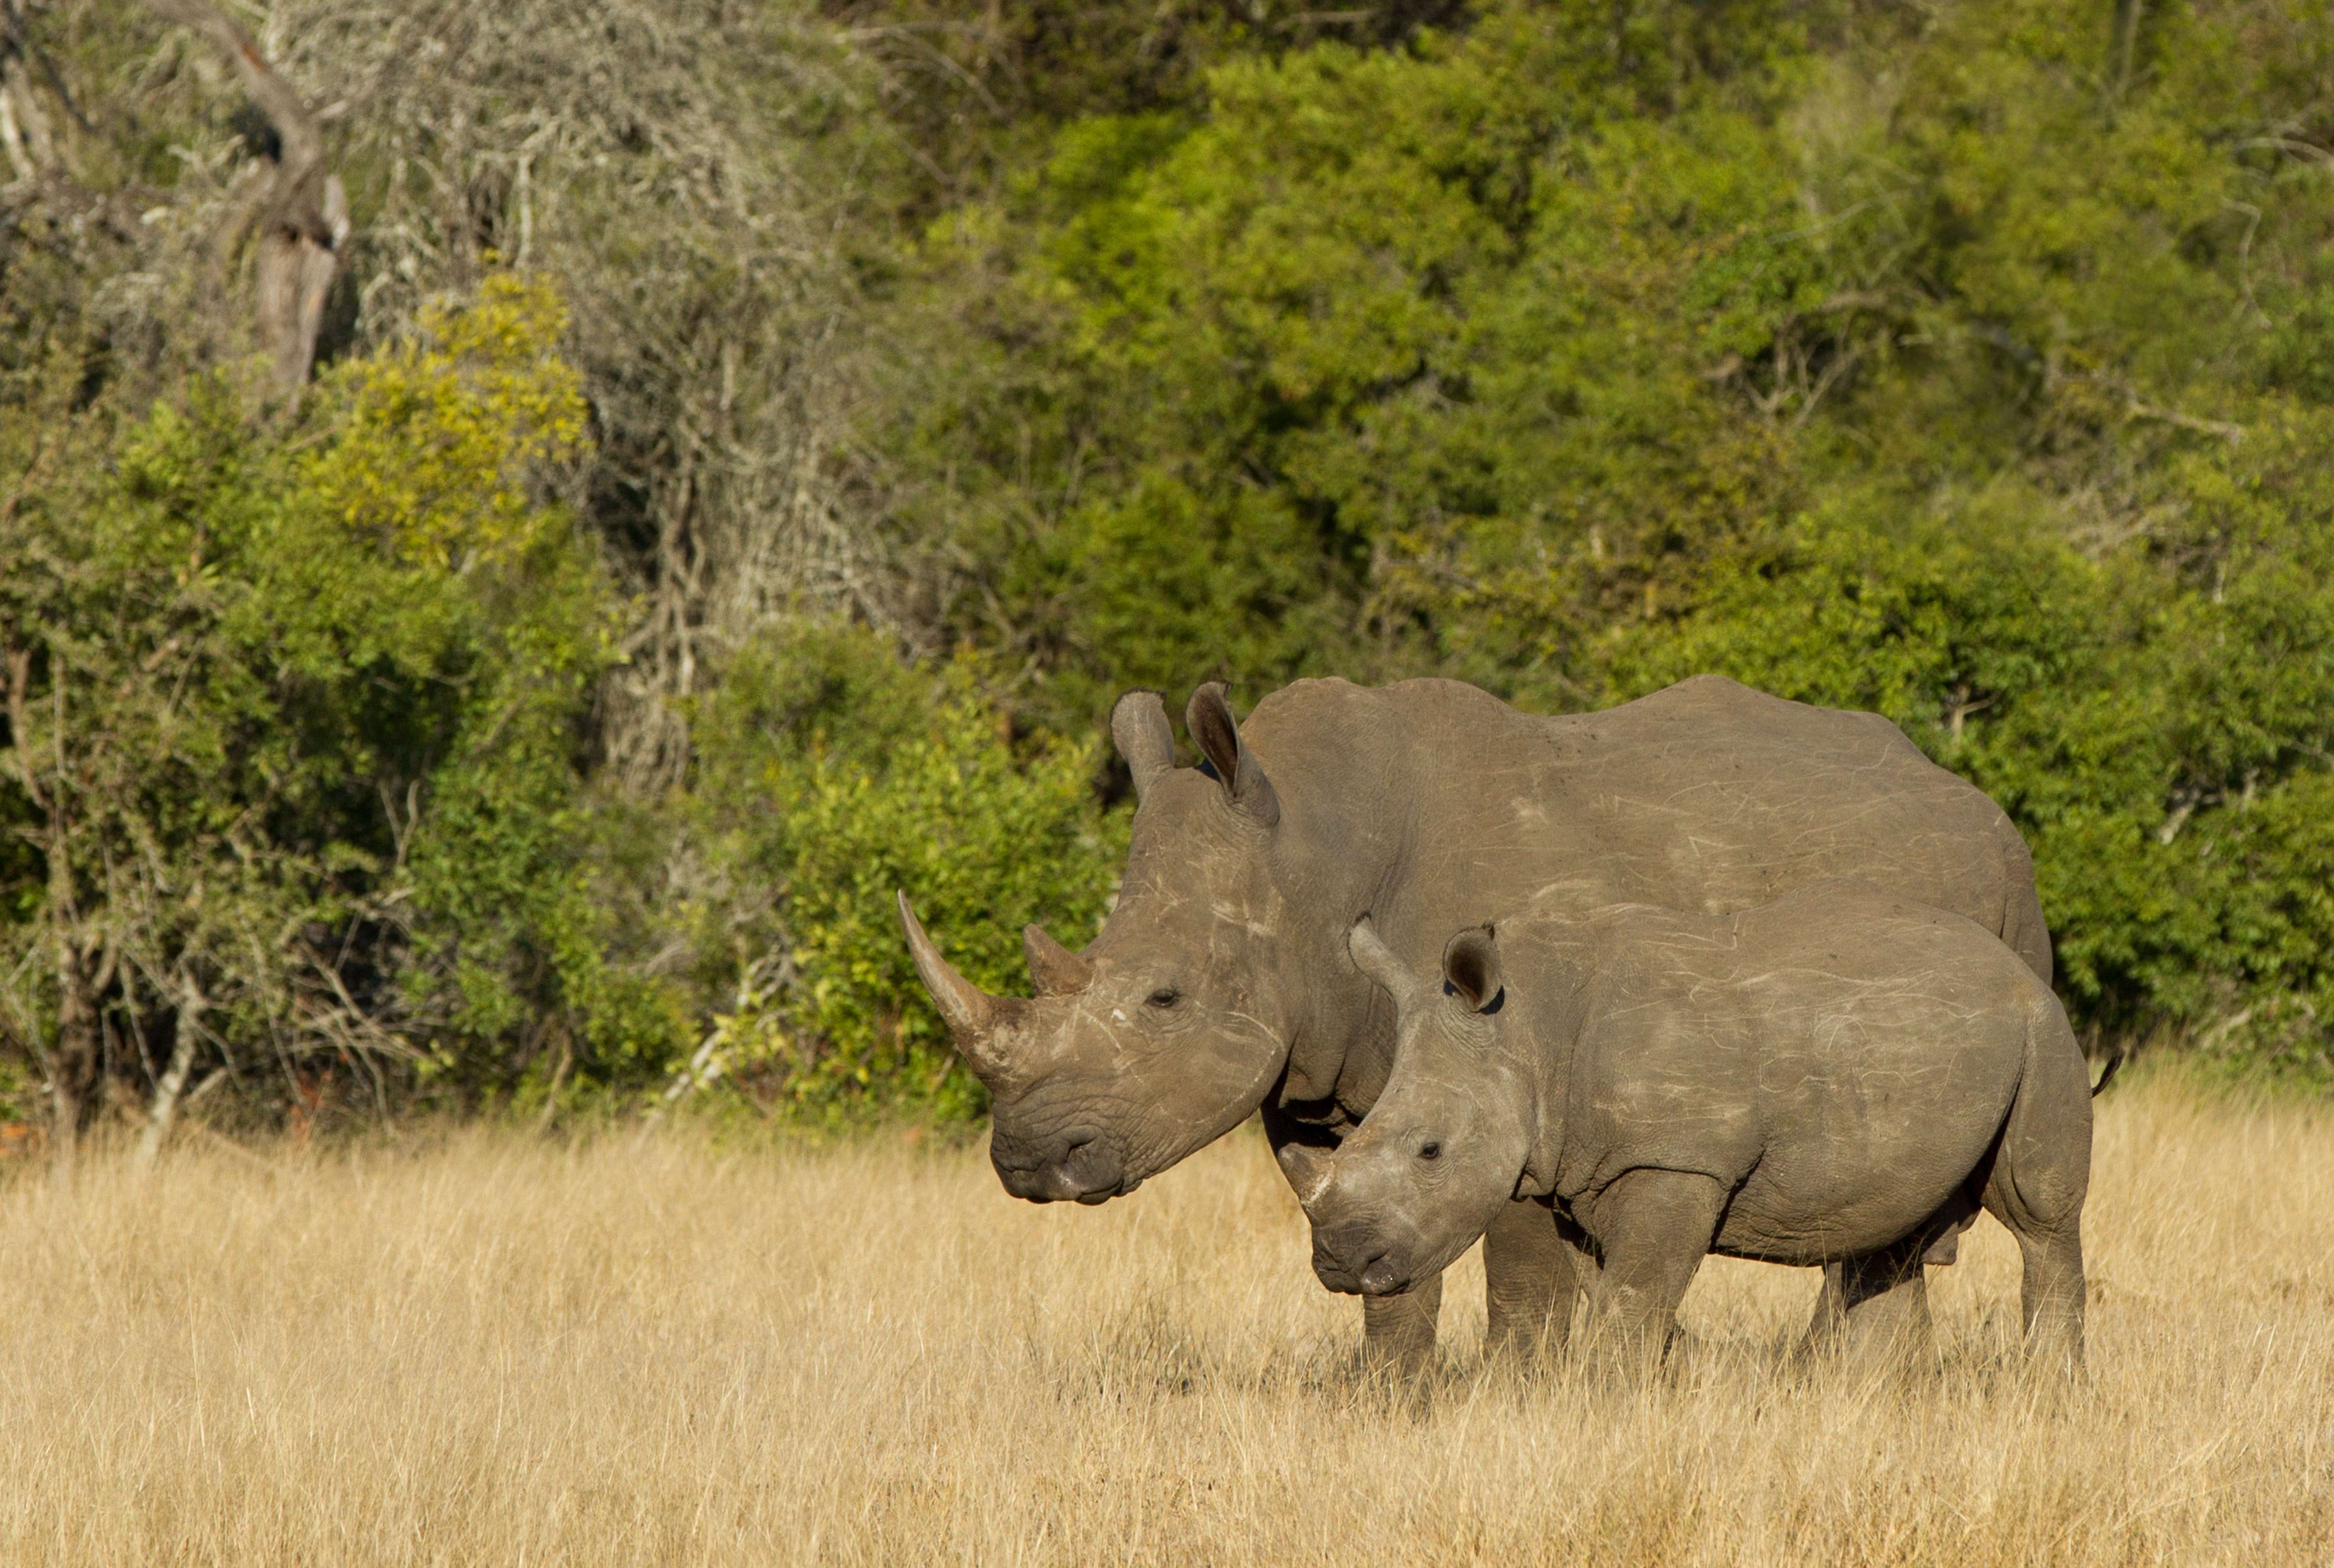 WWF works to protect rhinos in Kruger National Park. Photo by Gavin Lautenbach.